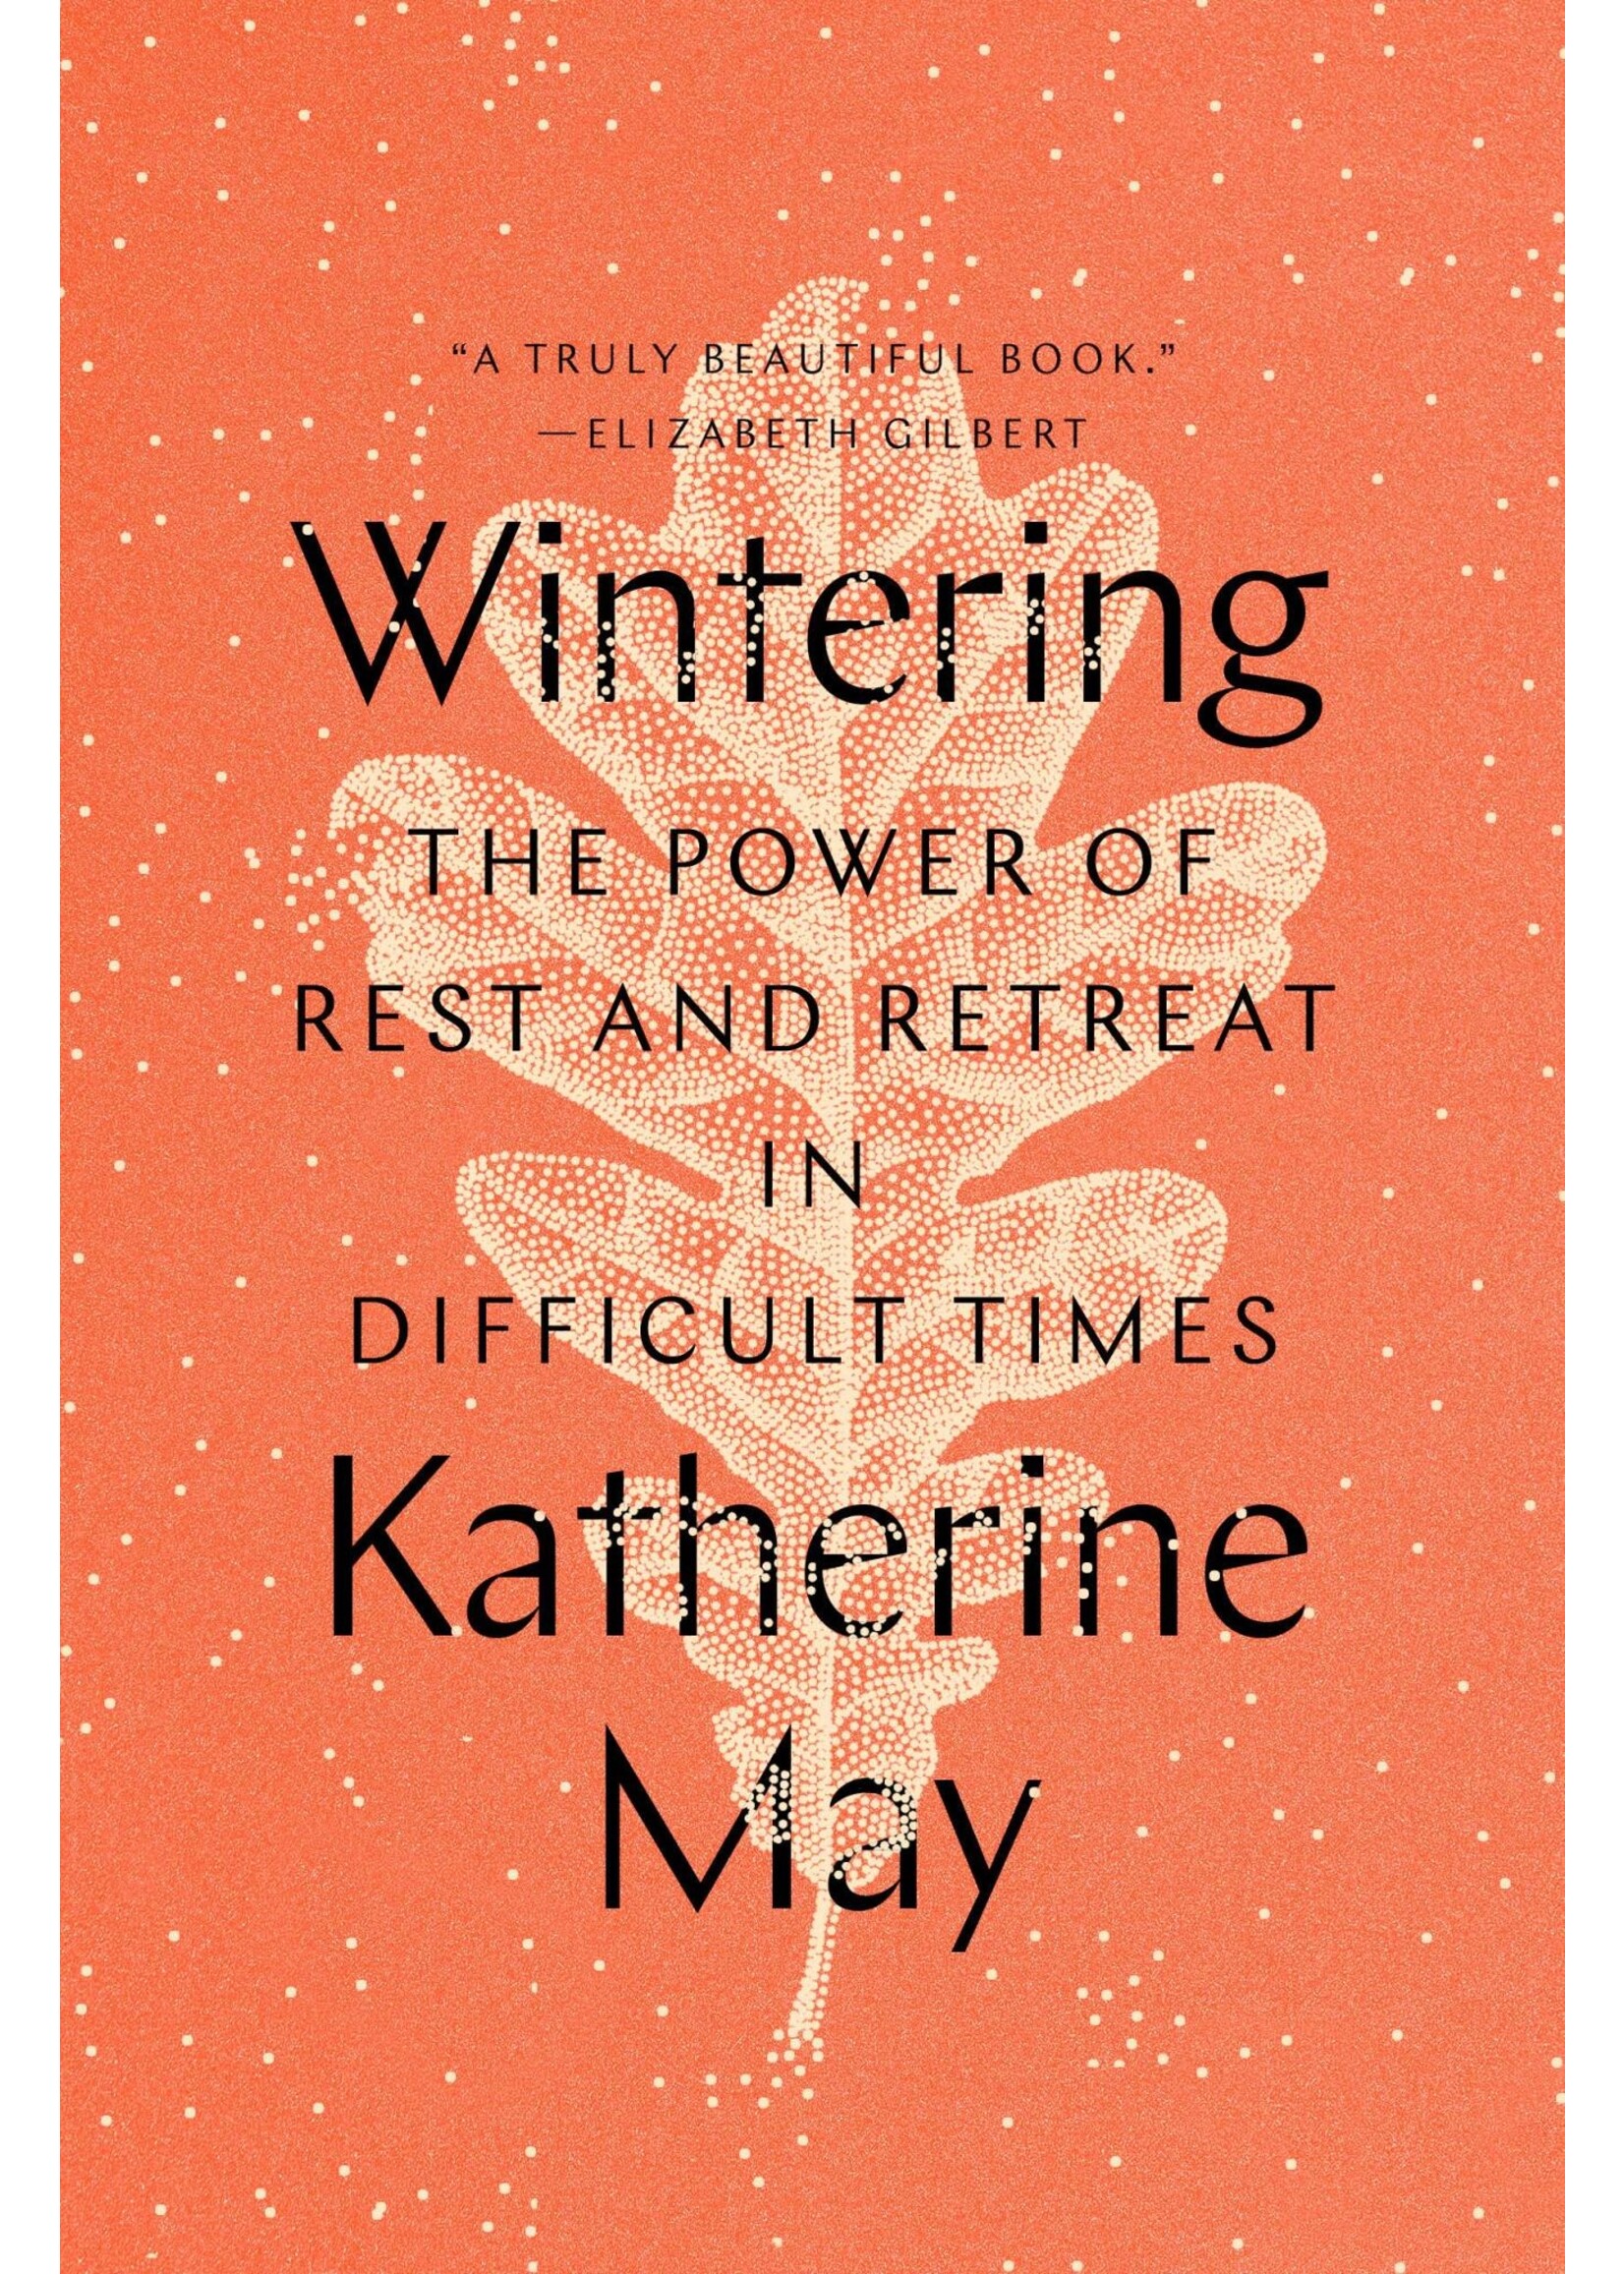 Wintering- The Power of Rest & Retreat in Difficult Times